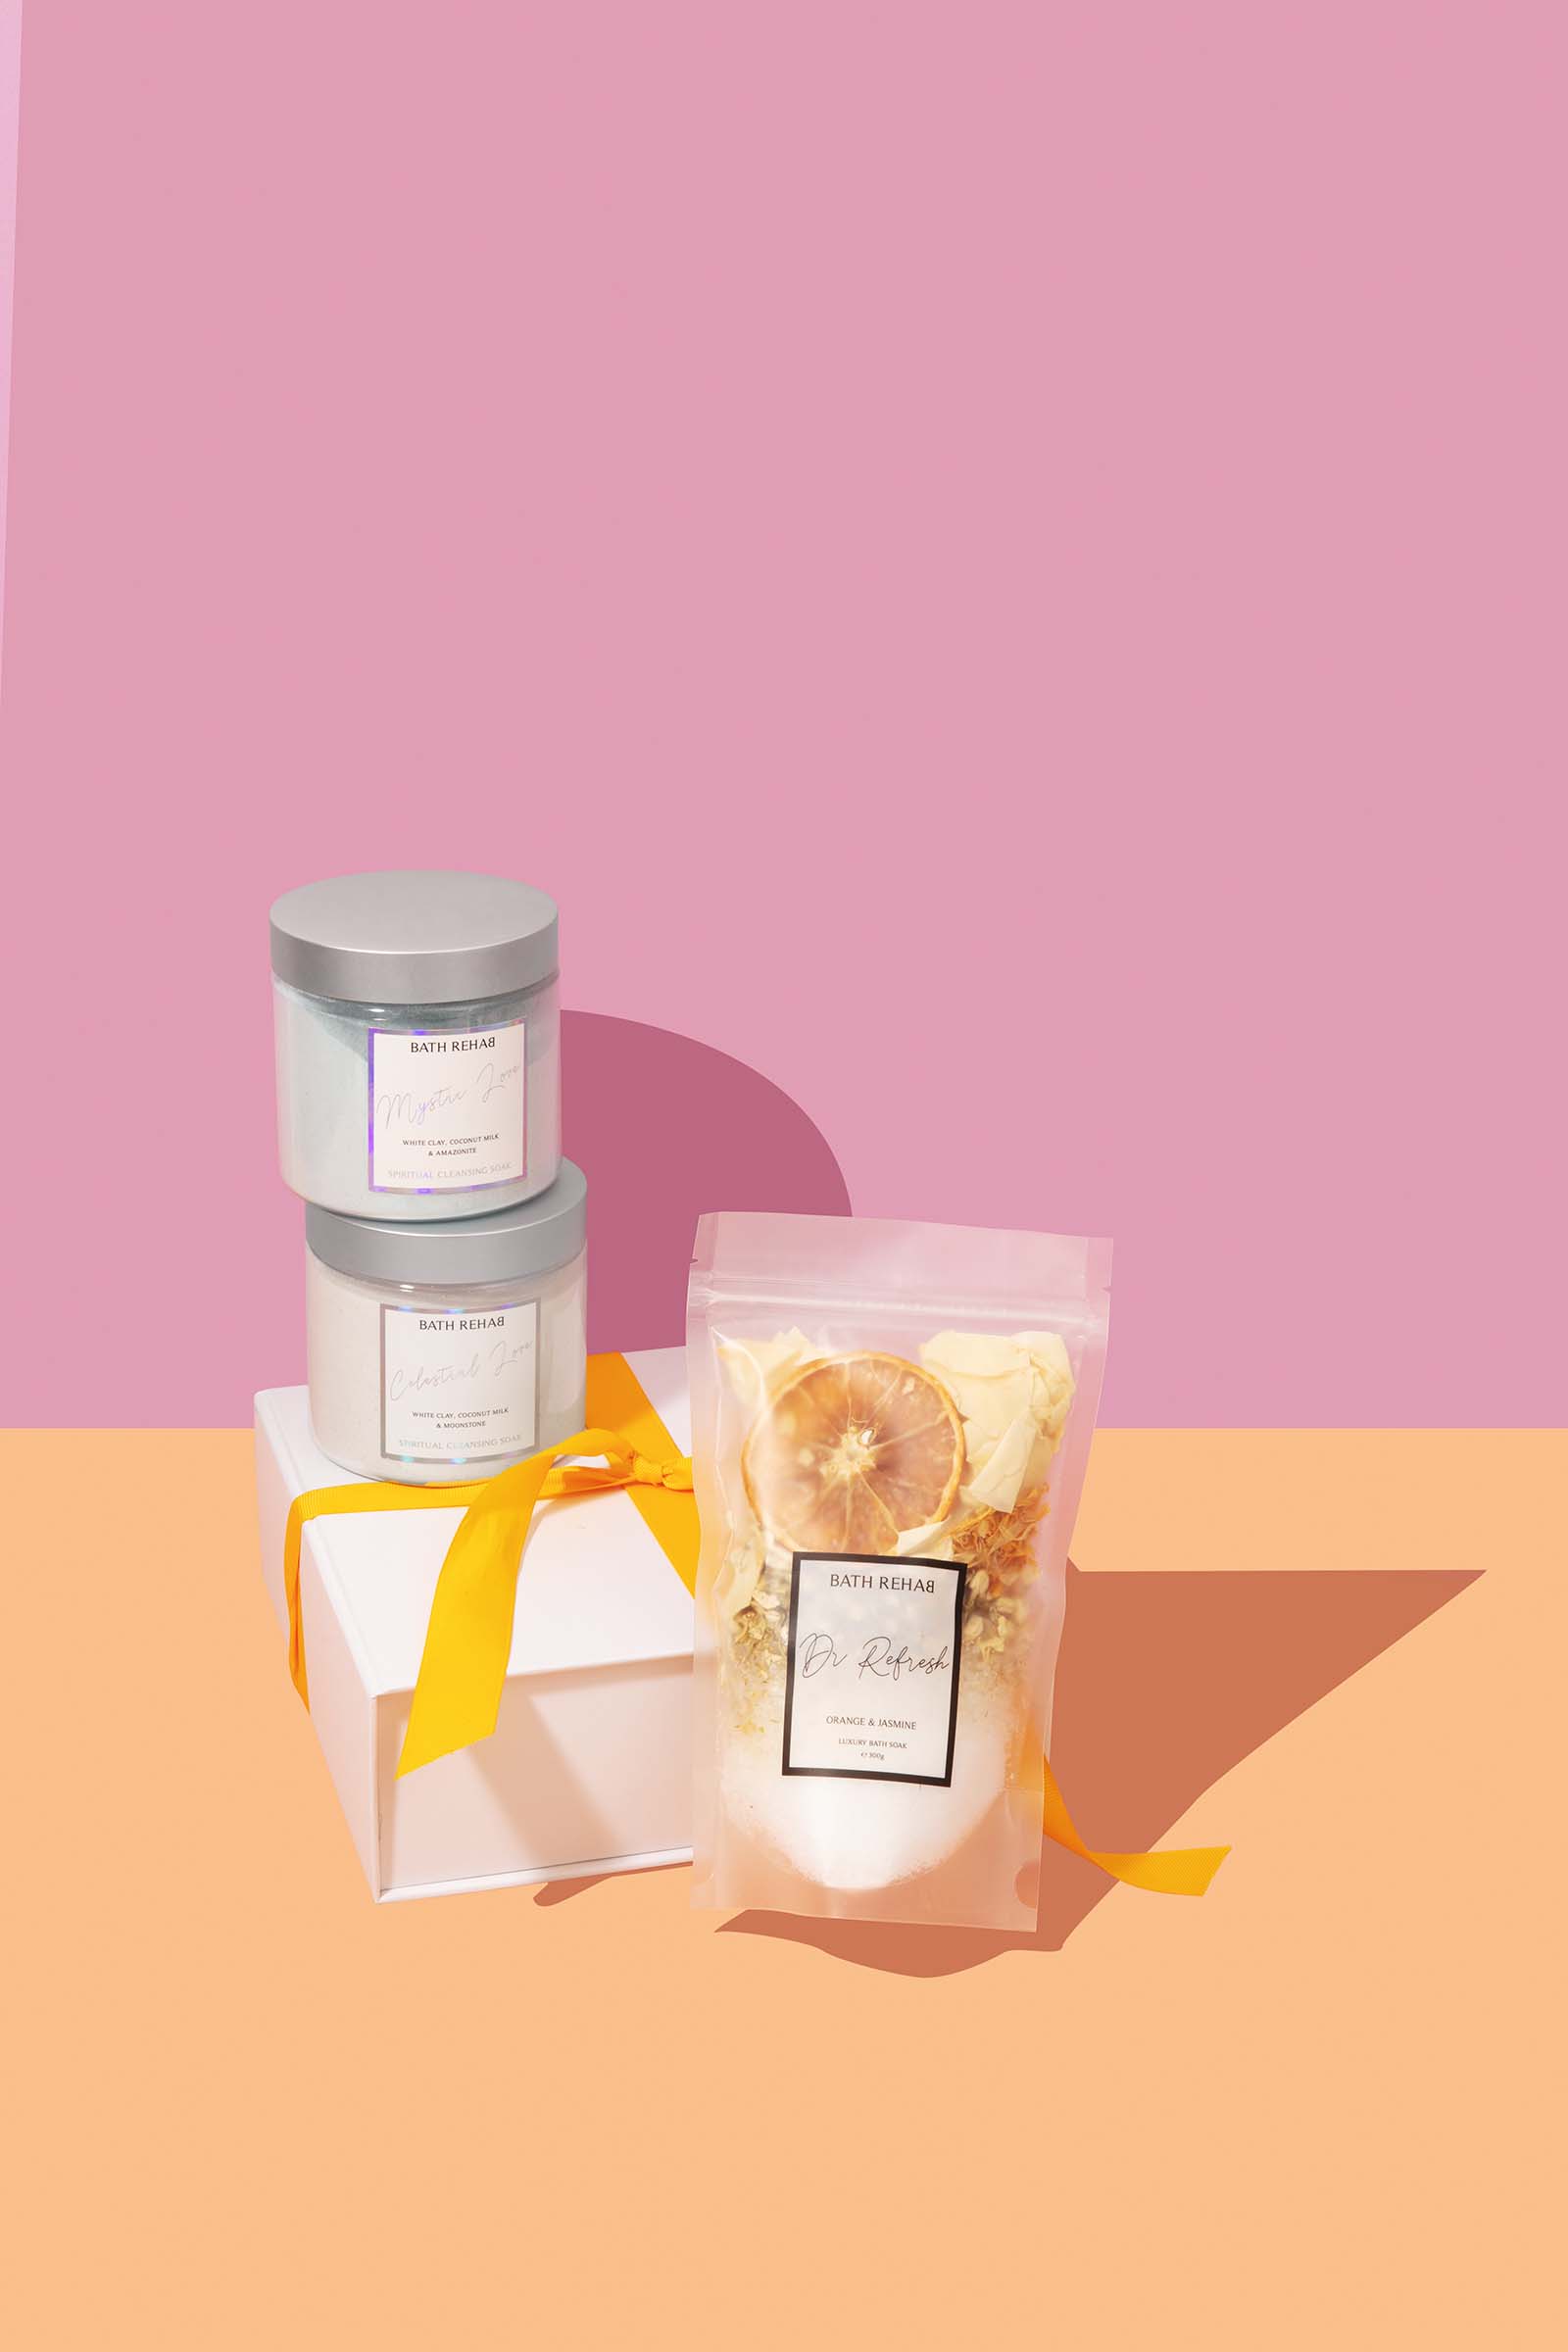 Minimal skincare product photos shot and styled for a skincare brand by colourpop studio